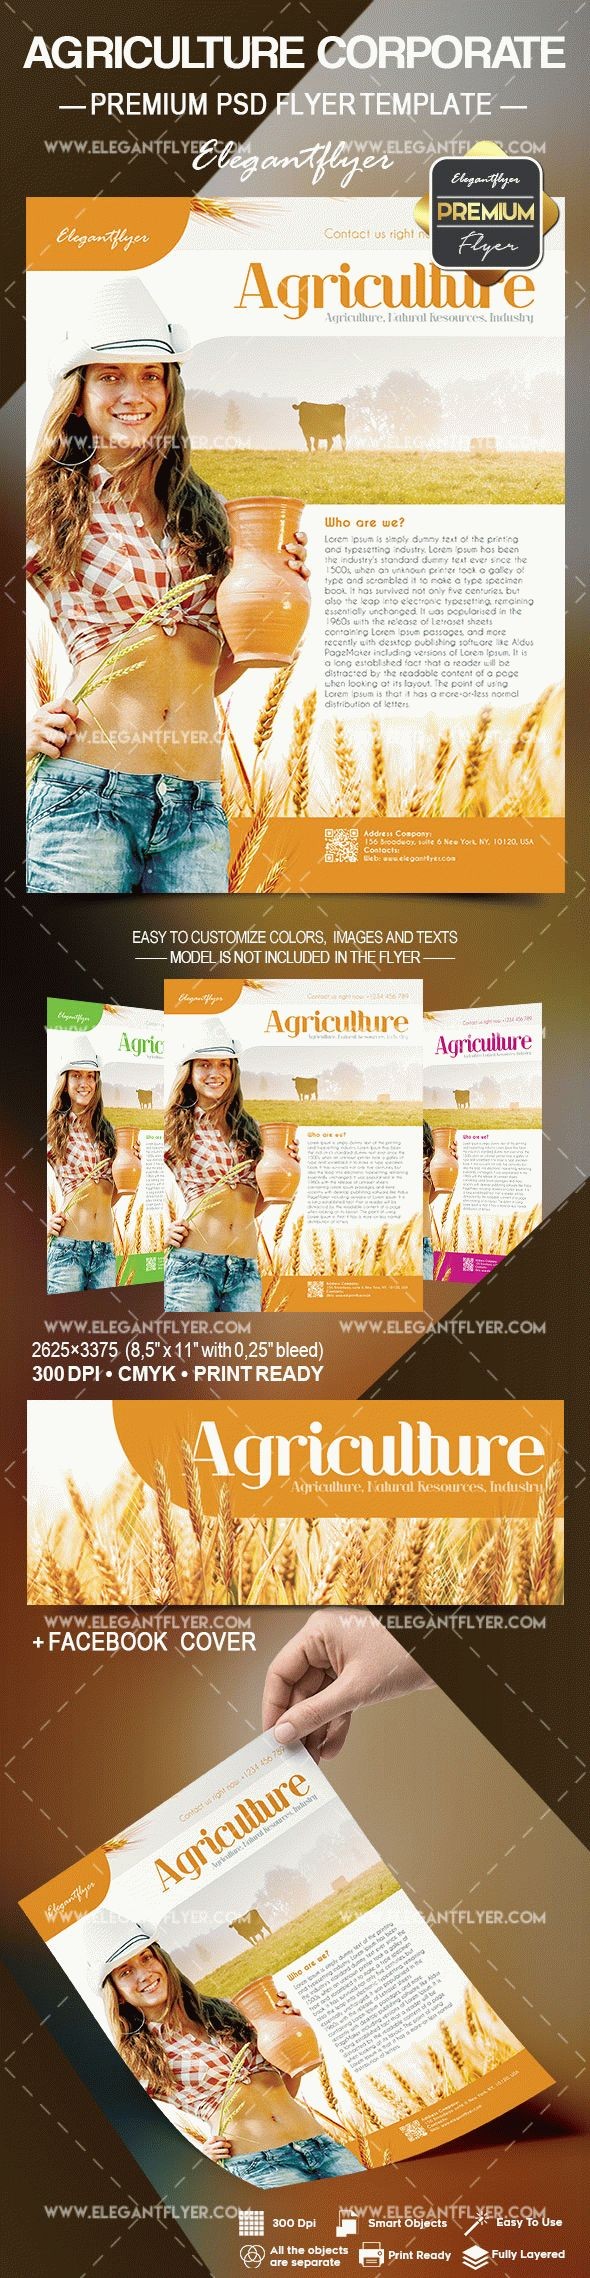 Agriculture Corporate by ElegantFlyer